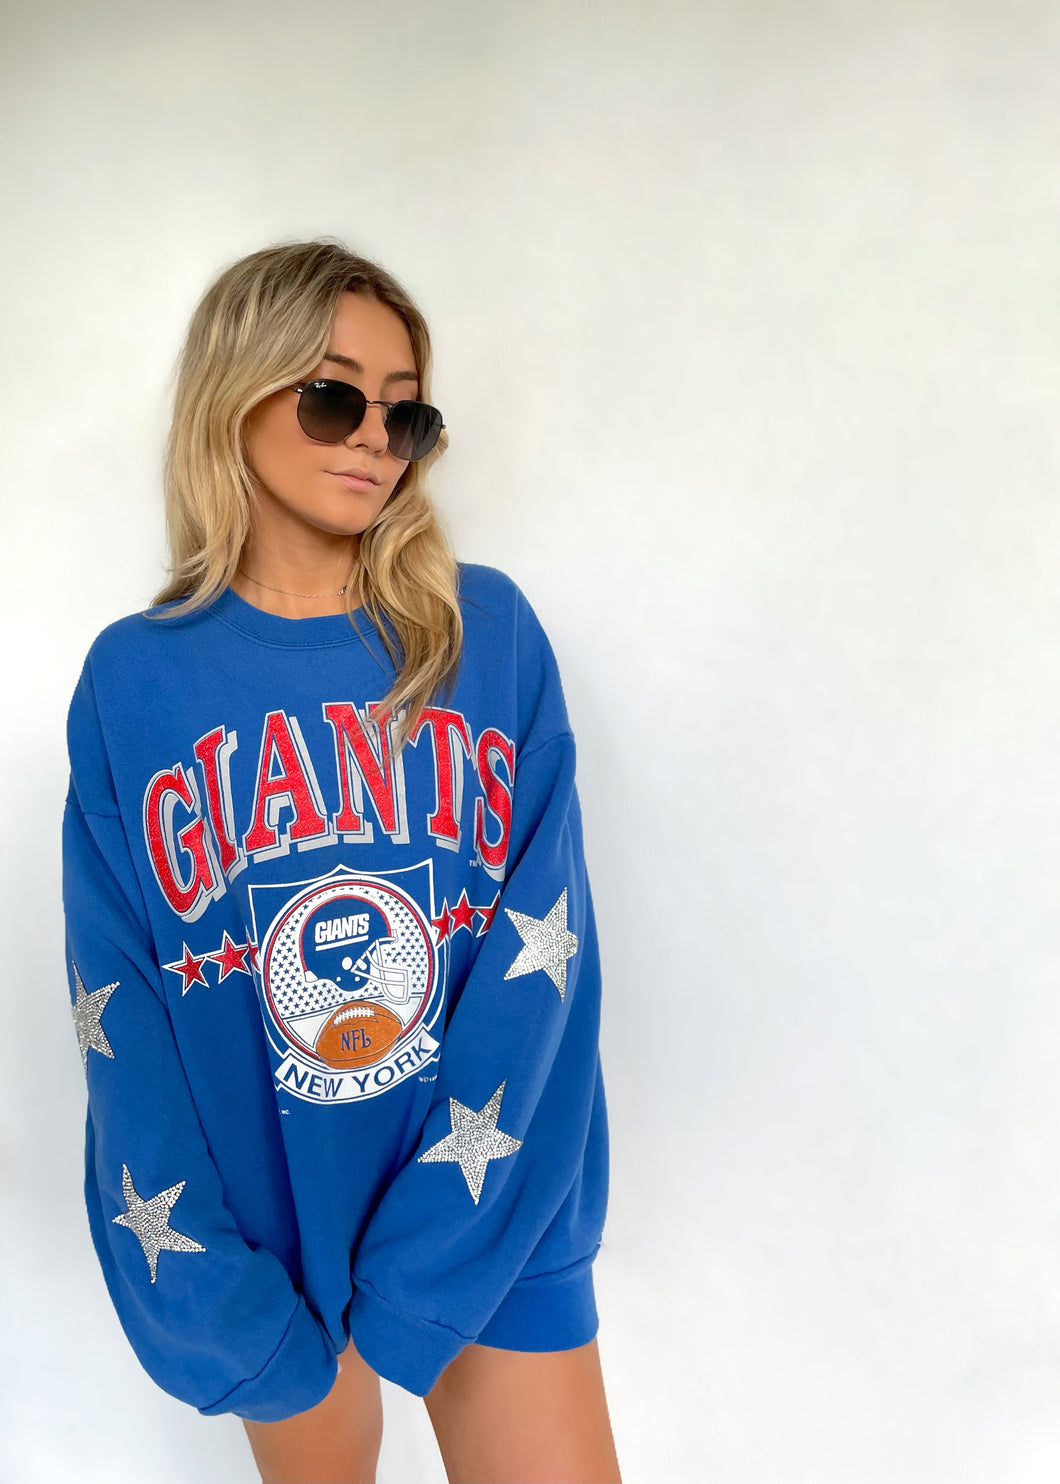 NY Giants, NFL One of a KIND Vintage Sweatshirt with Crystal Star Design